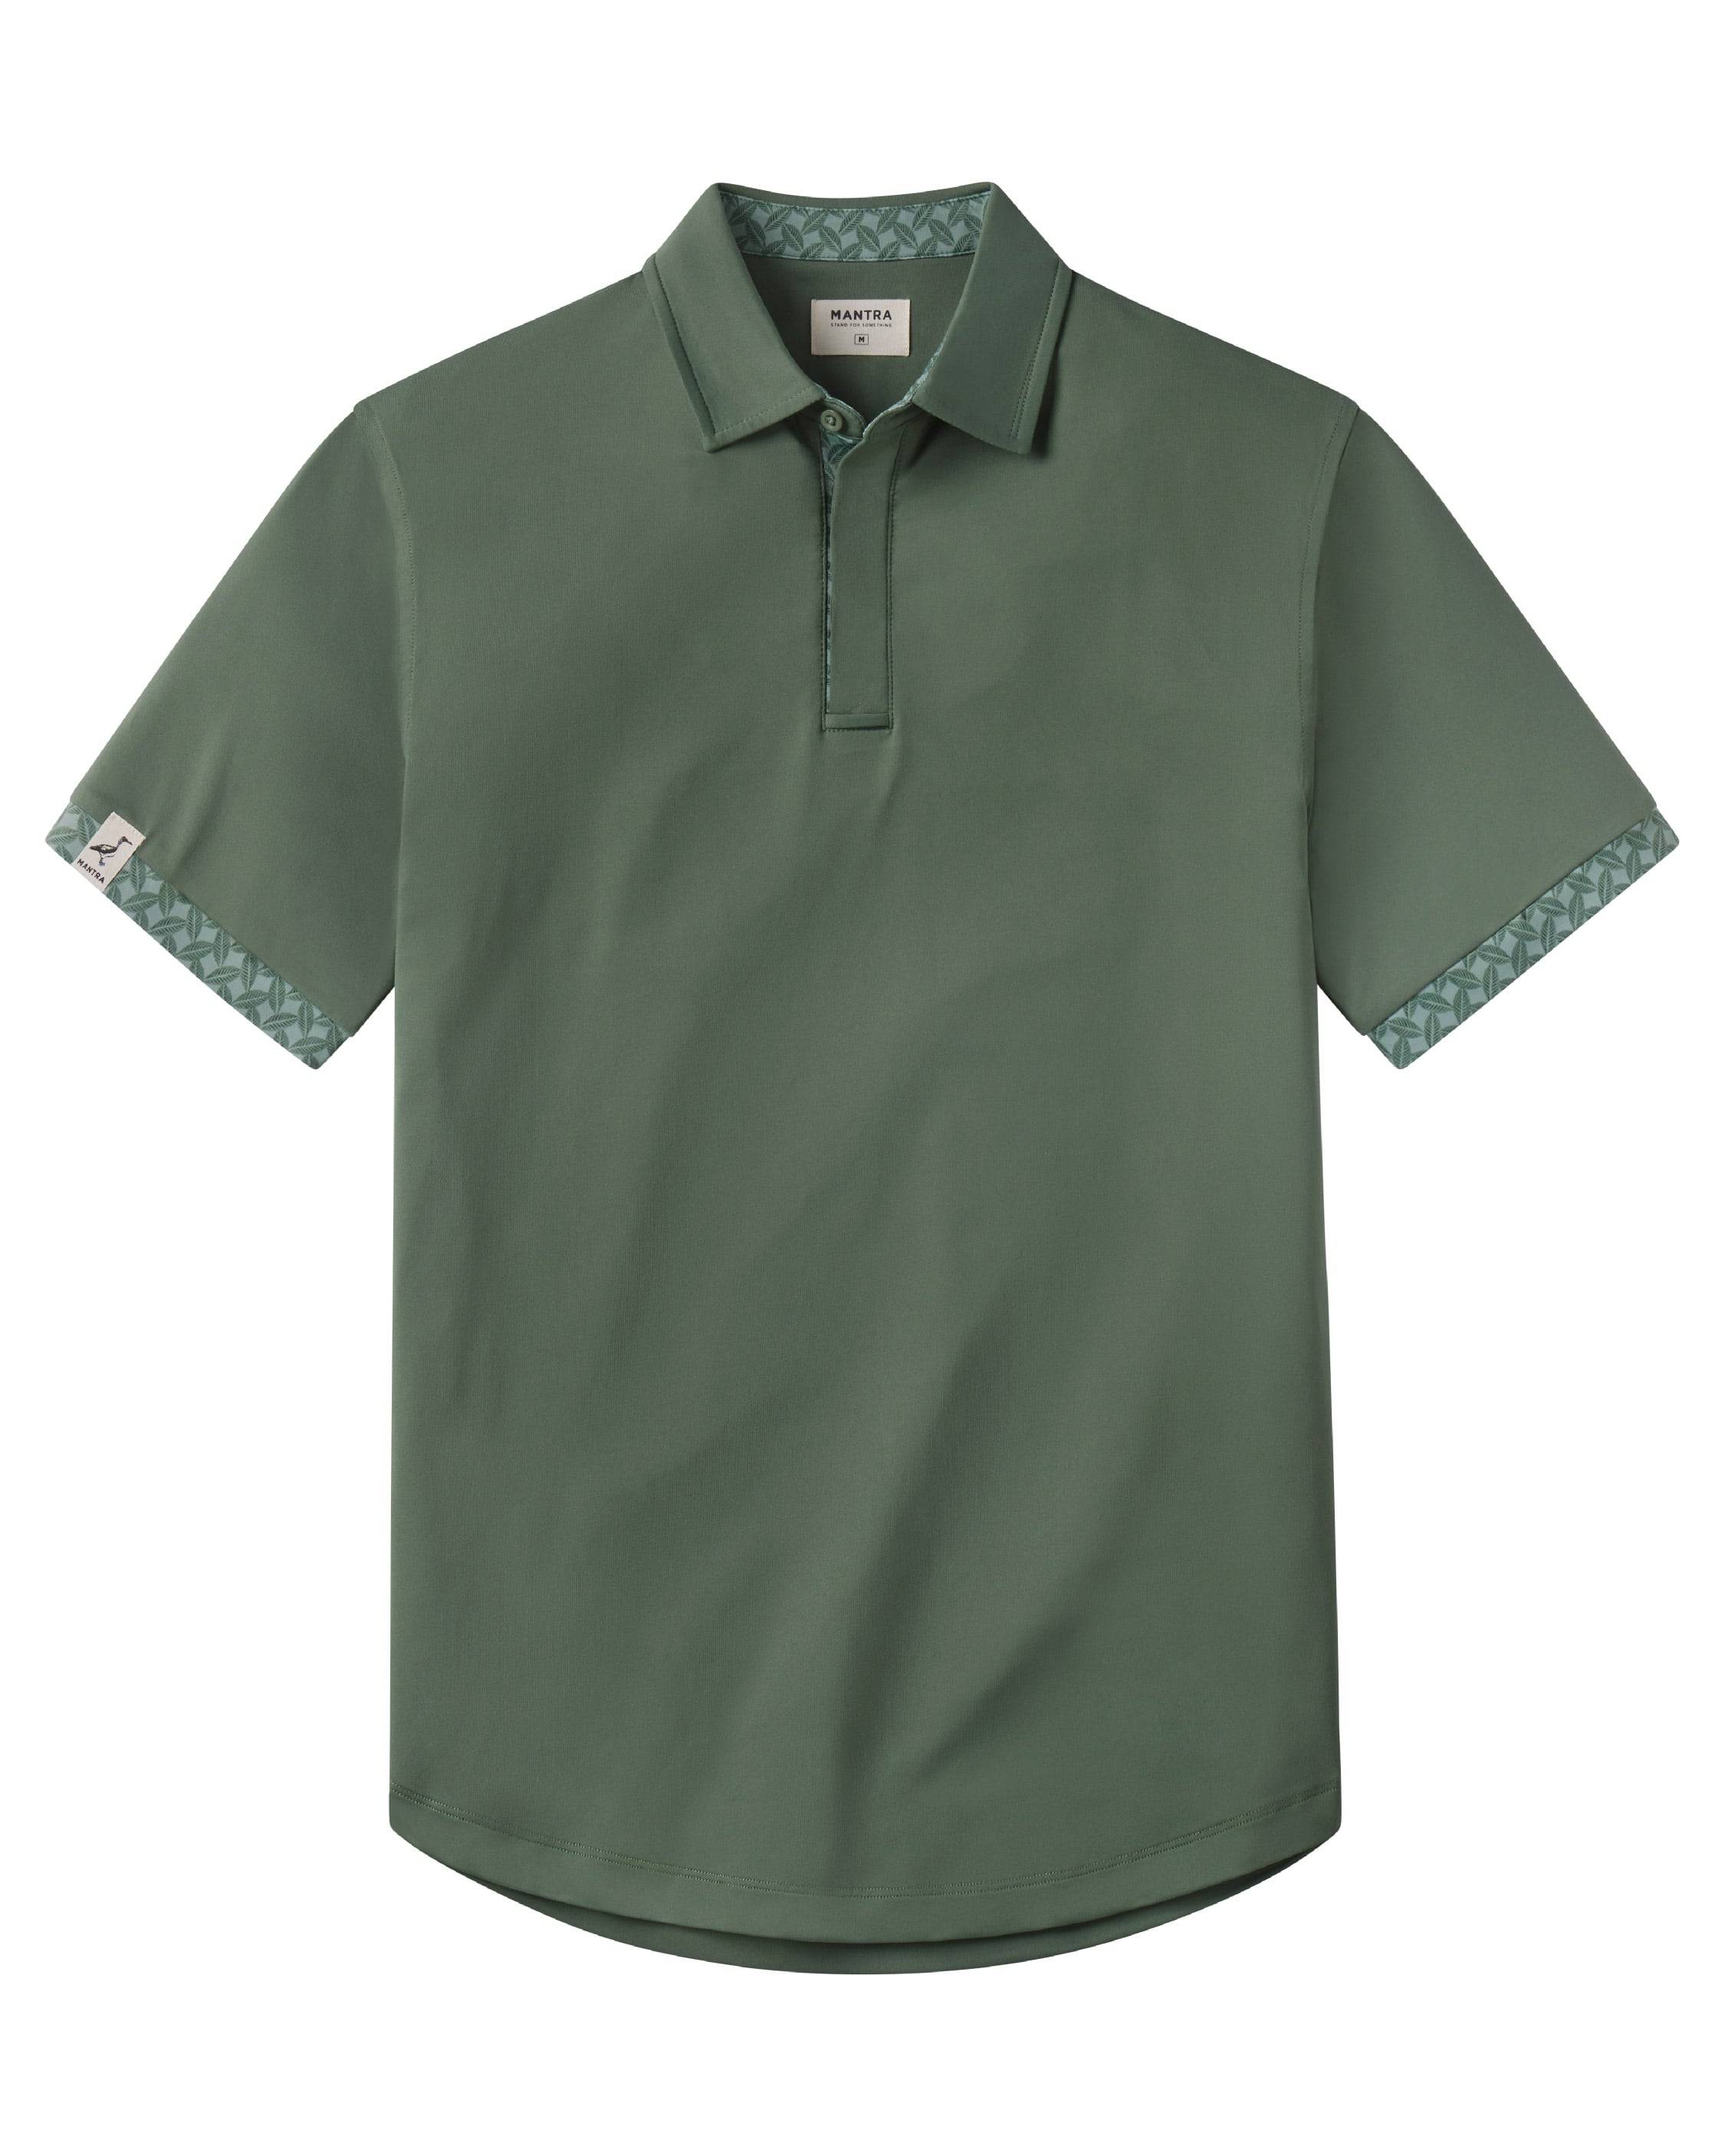 CATALYST POLO - POINT COLLAR - CANOPY CONTRAST color selector